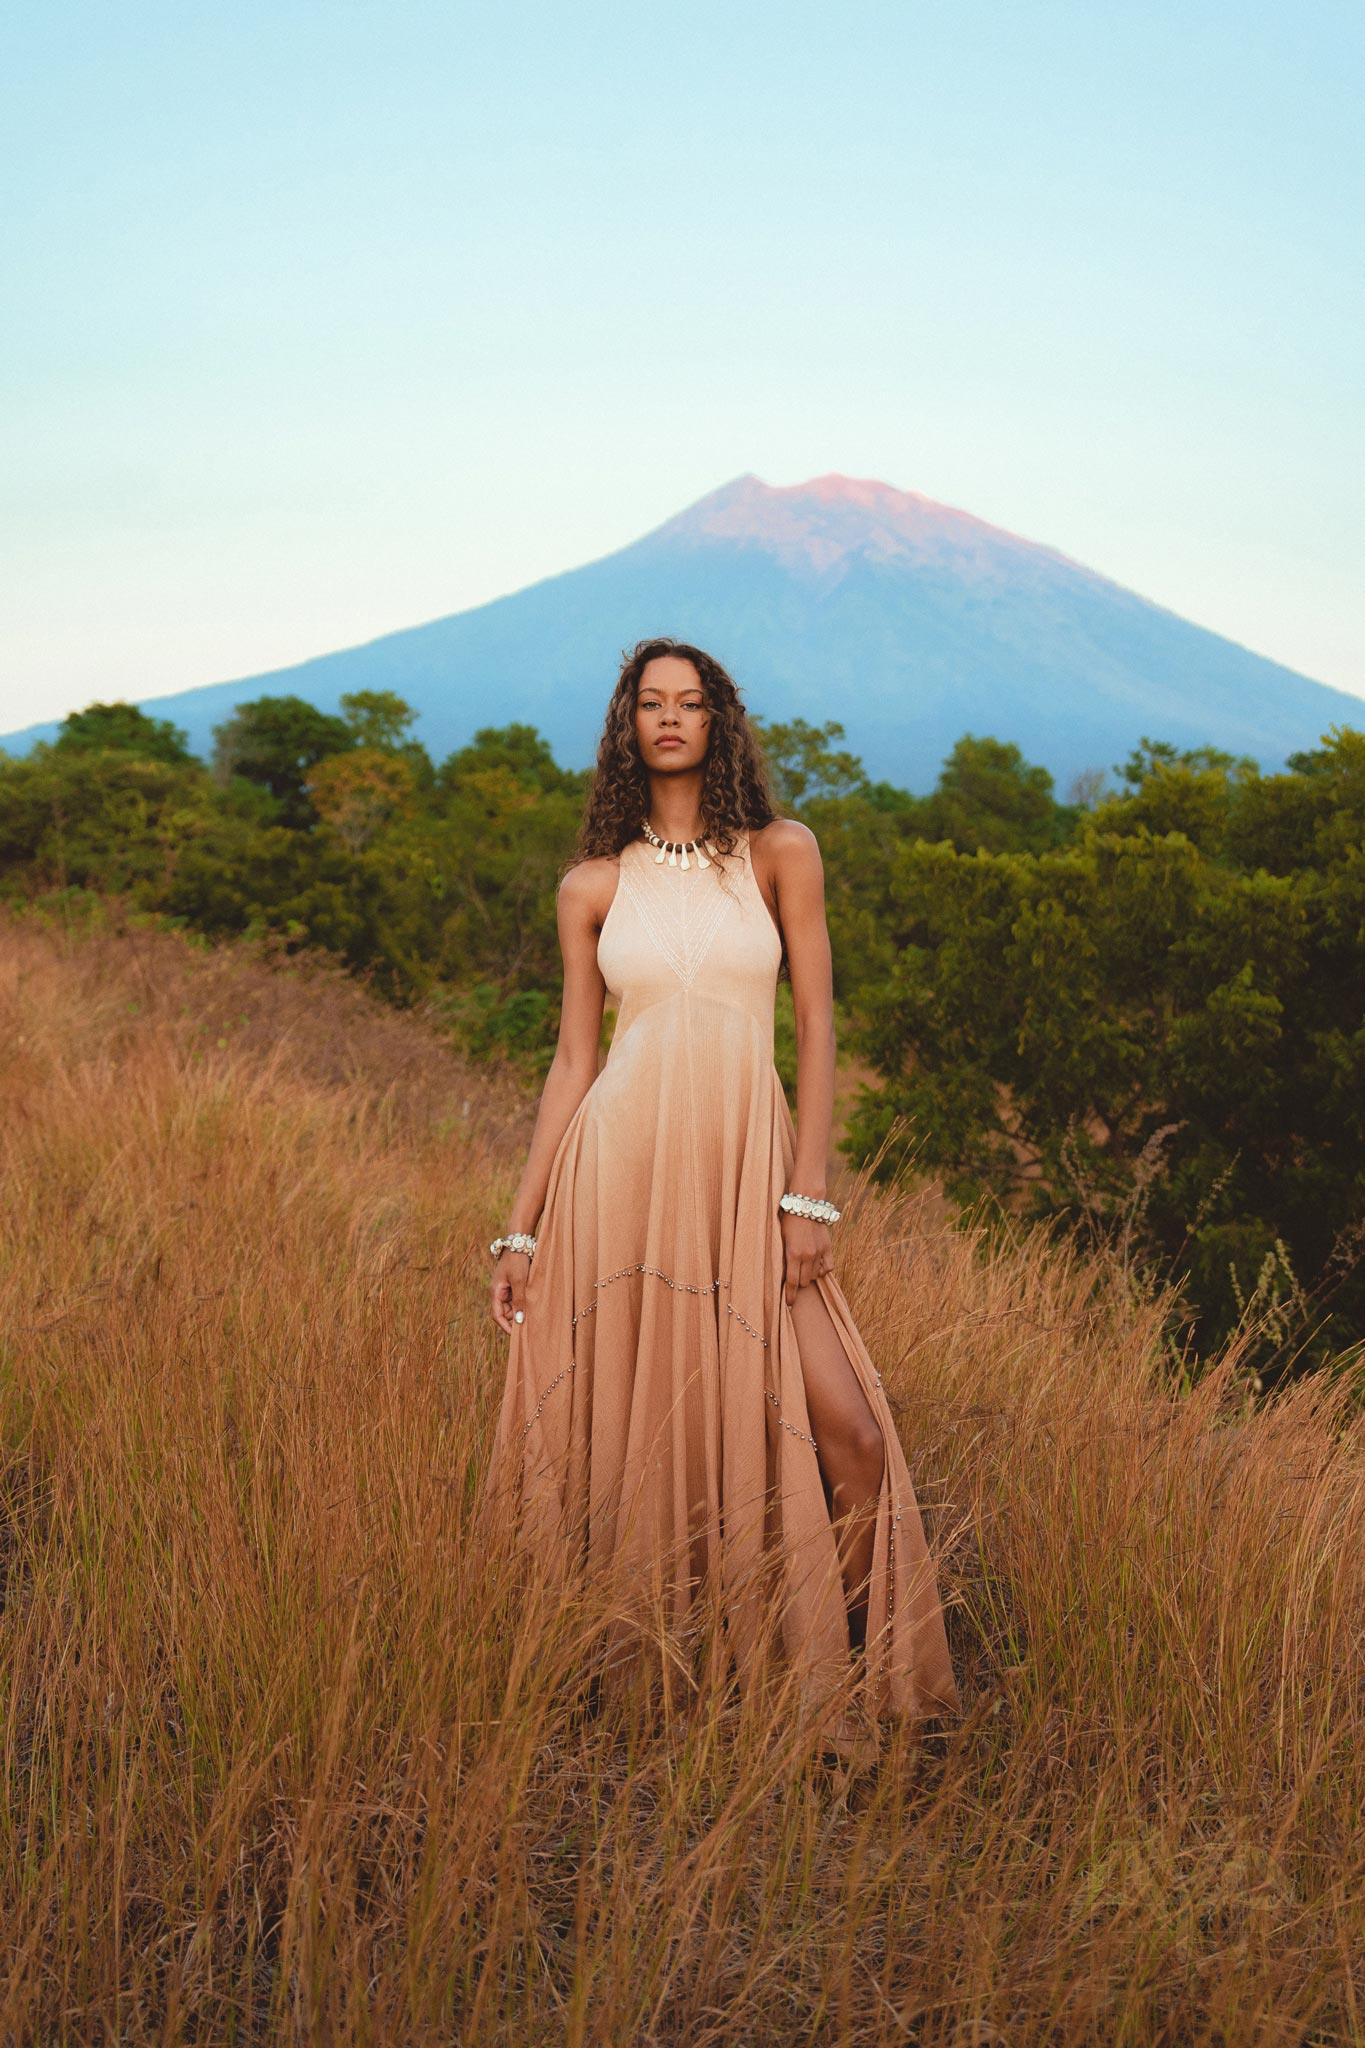 Look stylish and sophisticated with the Ombré Pink Minimalist Dress from aya sacred wear.